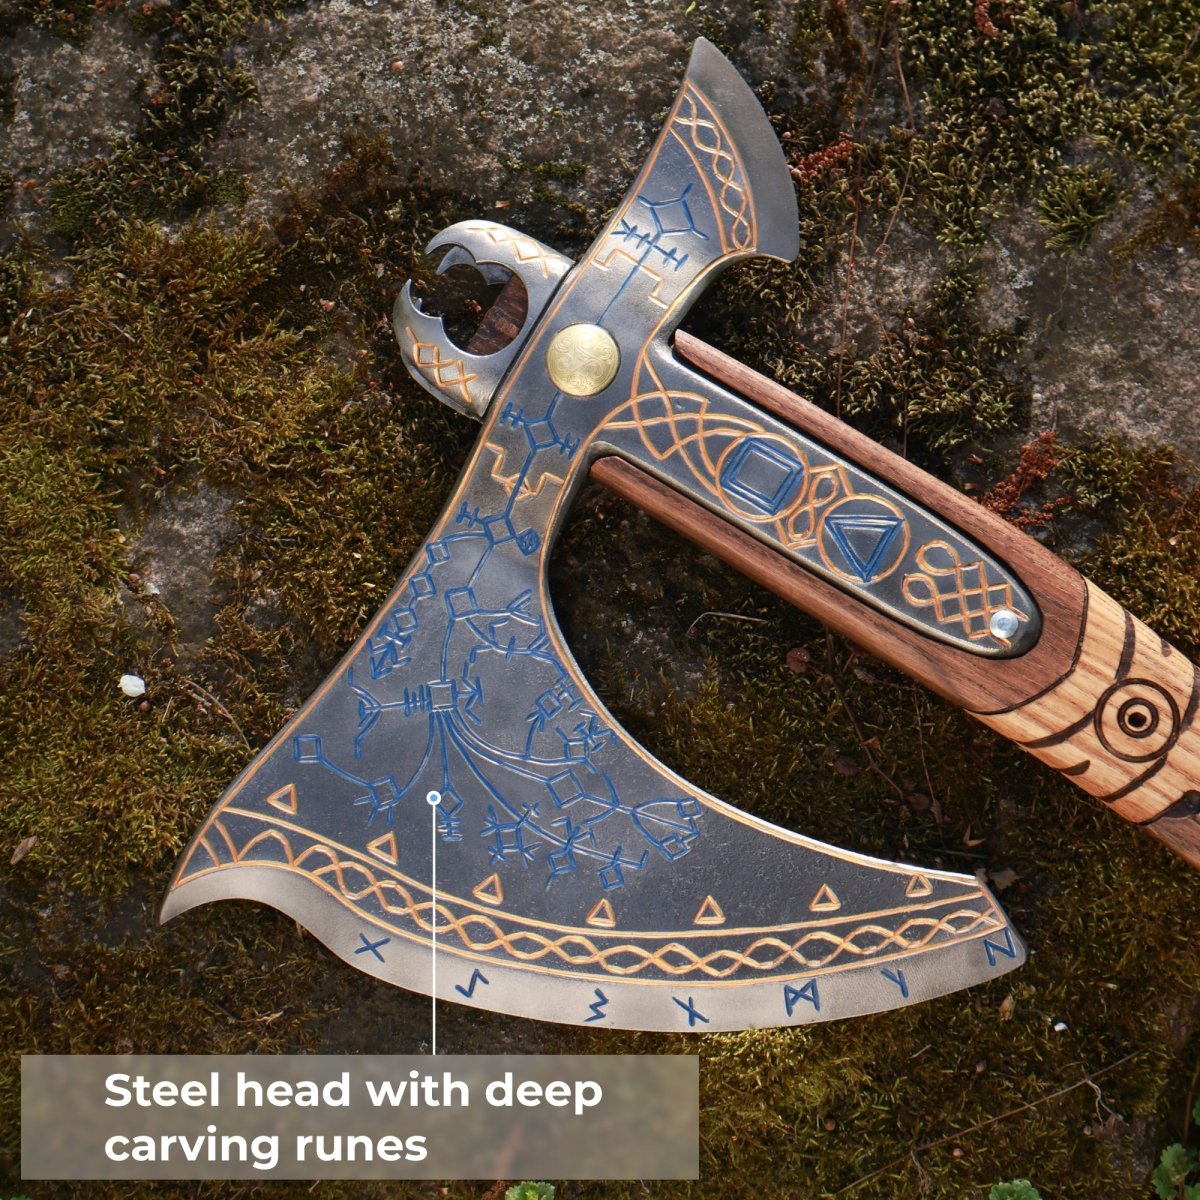 Hand-forged Real Leviathan axe with hardened blade from AncientSmithy